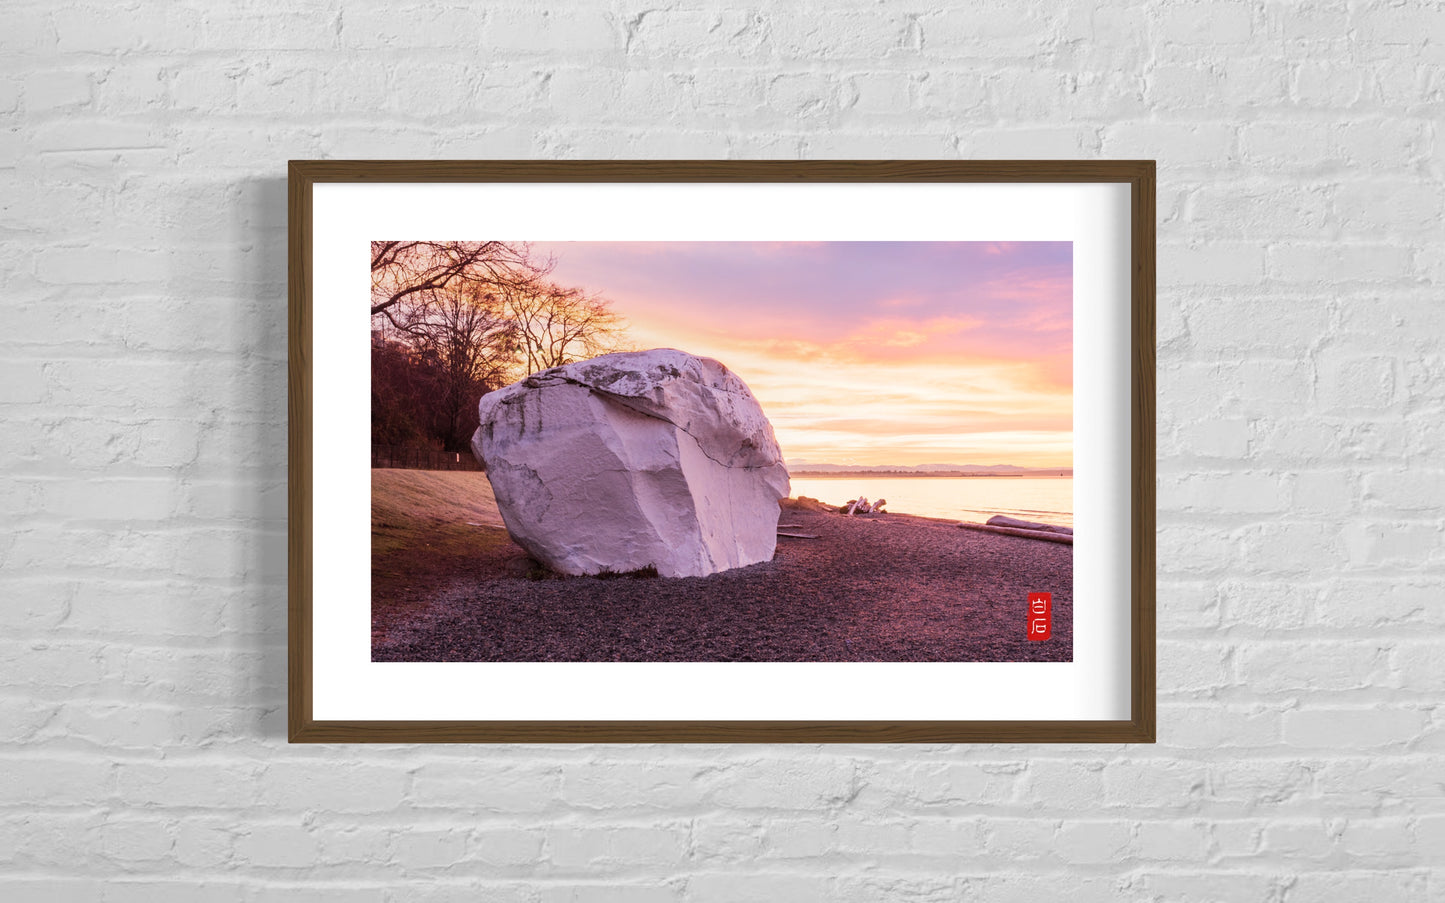 Sunrise at White Rock: 18*30 with solid wood frame